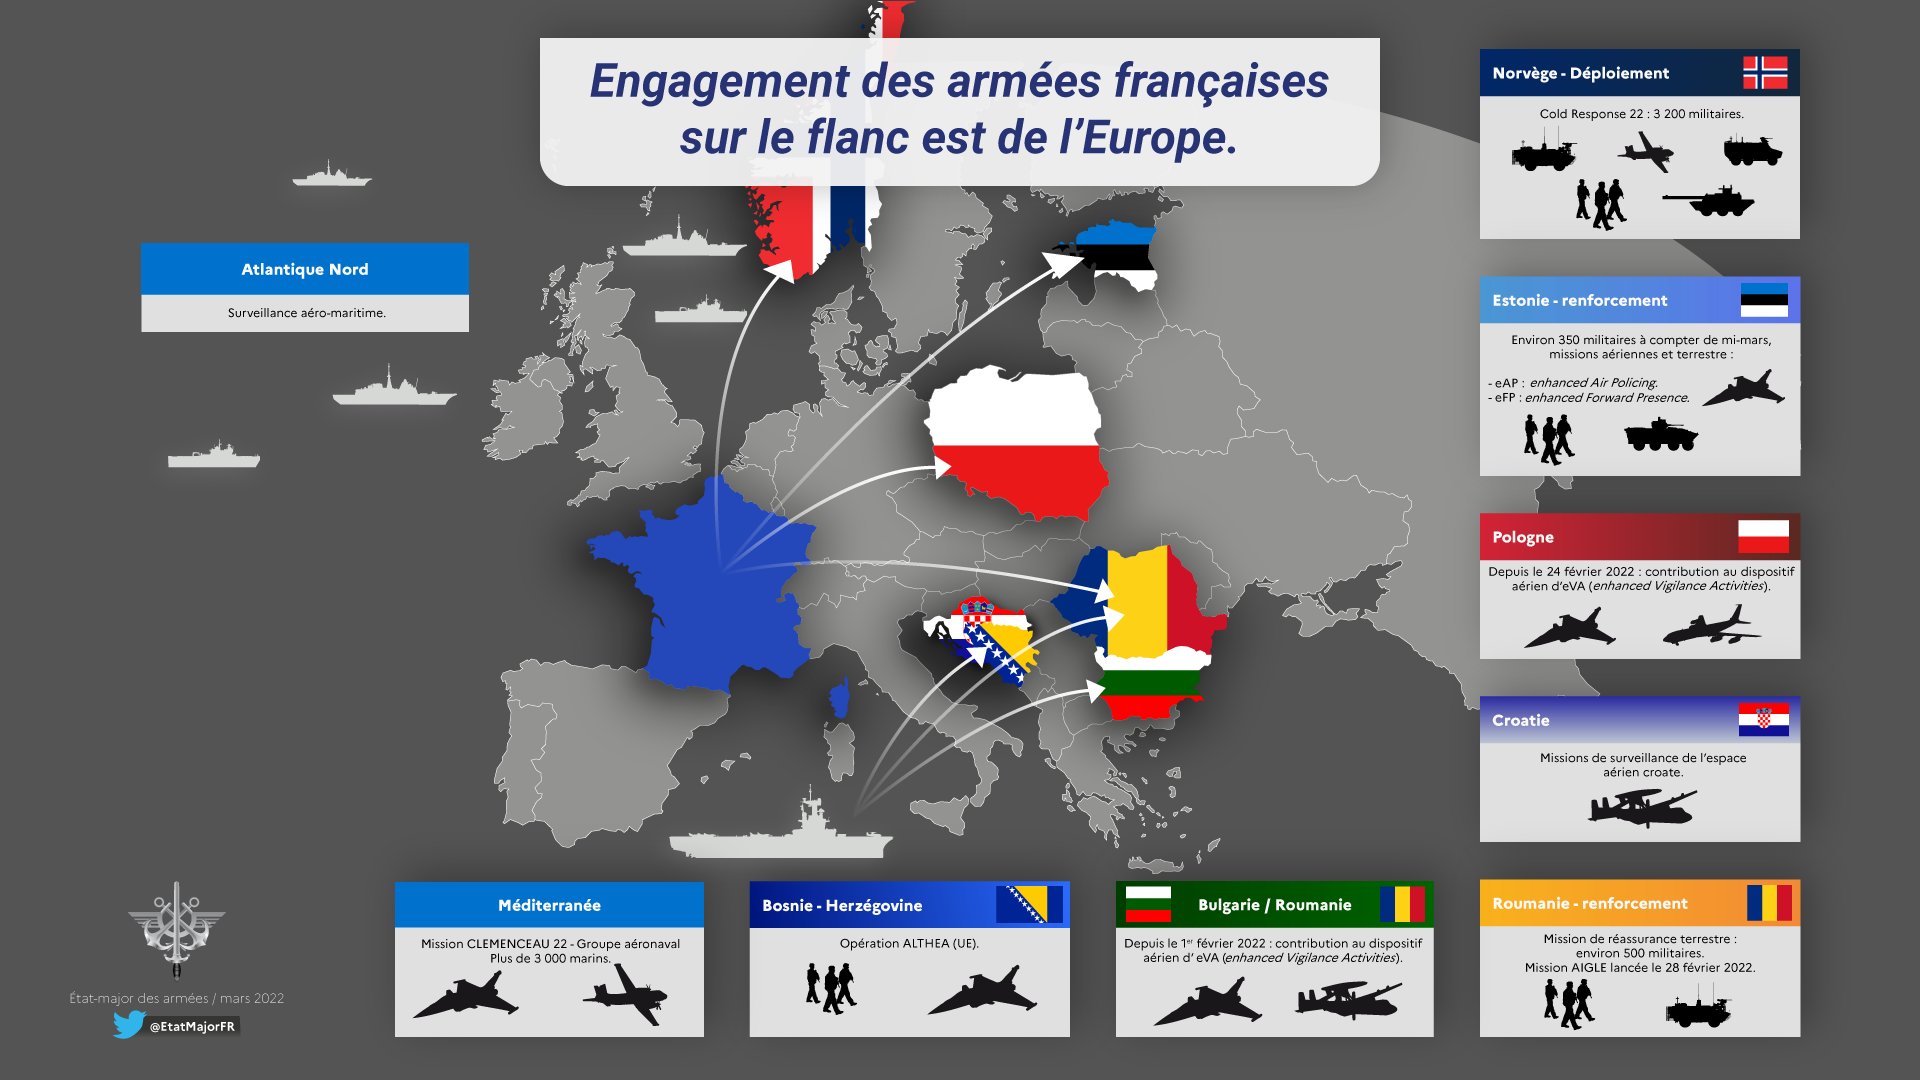 Pierre Morcos on Twitter: "#NATO | Latest of France's contribution to Europe's security. Strong military on land, at sea and in the air. https://t.co/WO0lFFtfM5" /